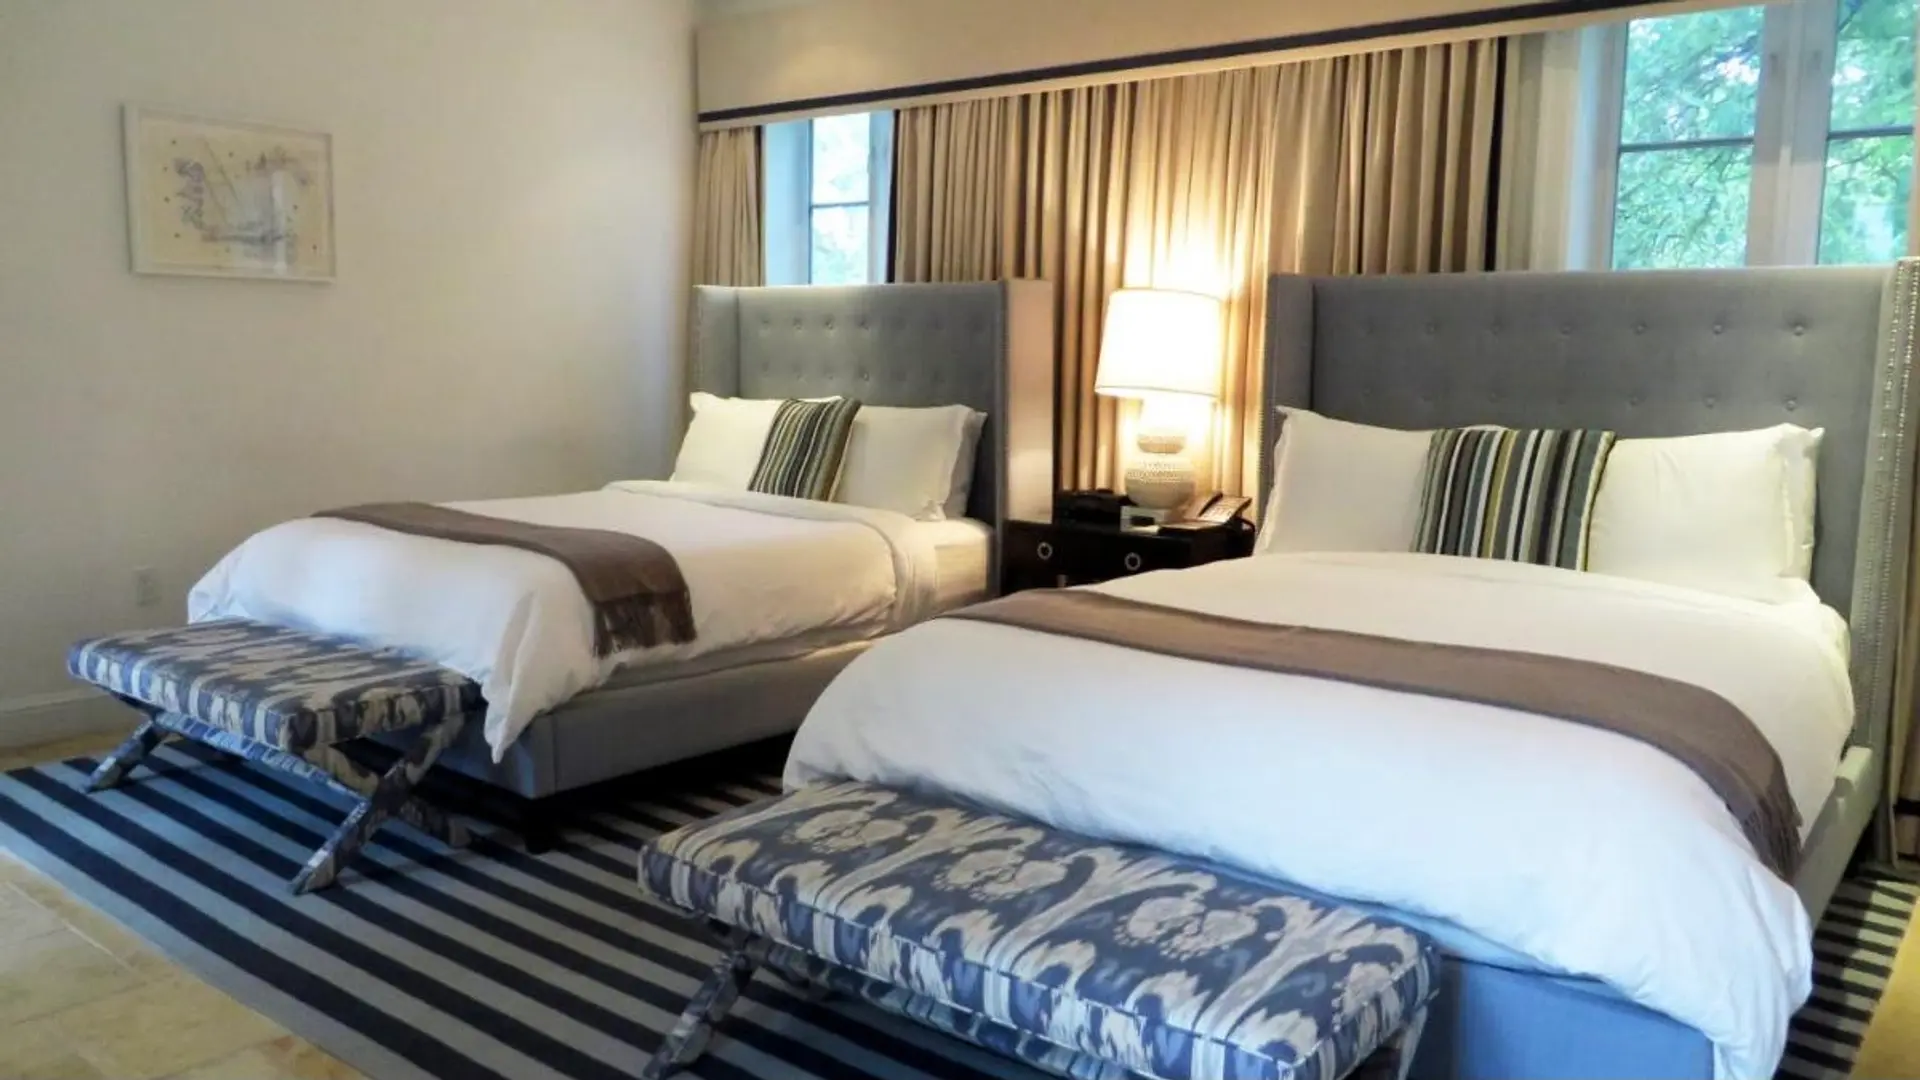 Hotel review Accommodation' - Fisher Island Club and Hotel - 3